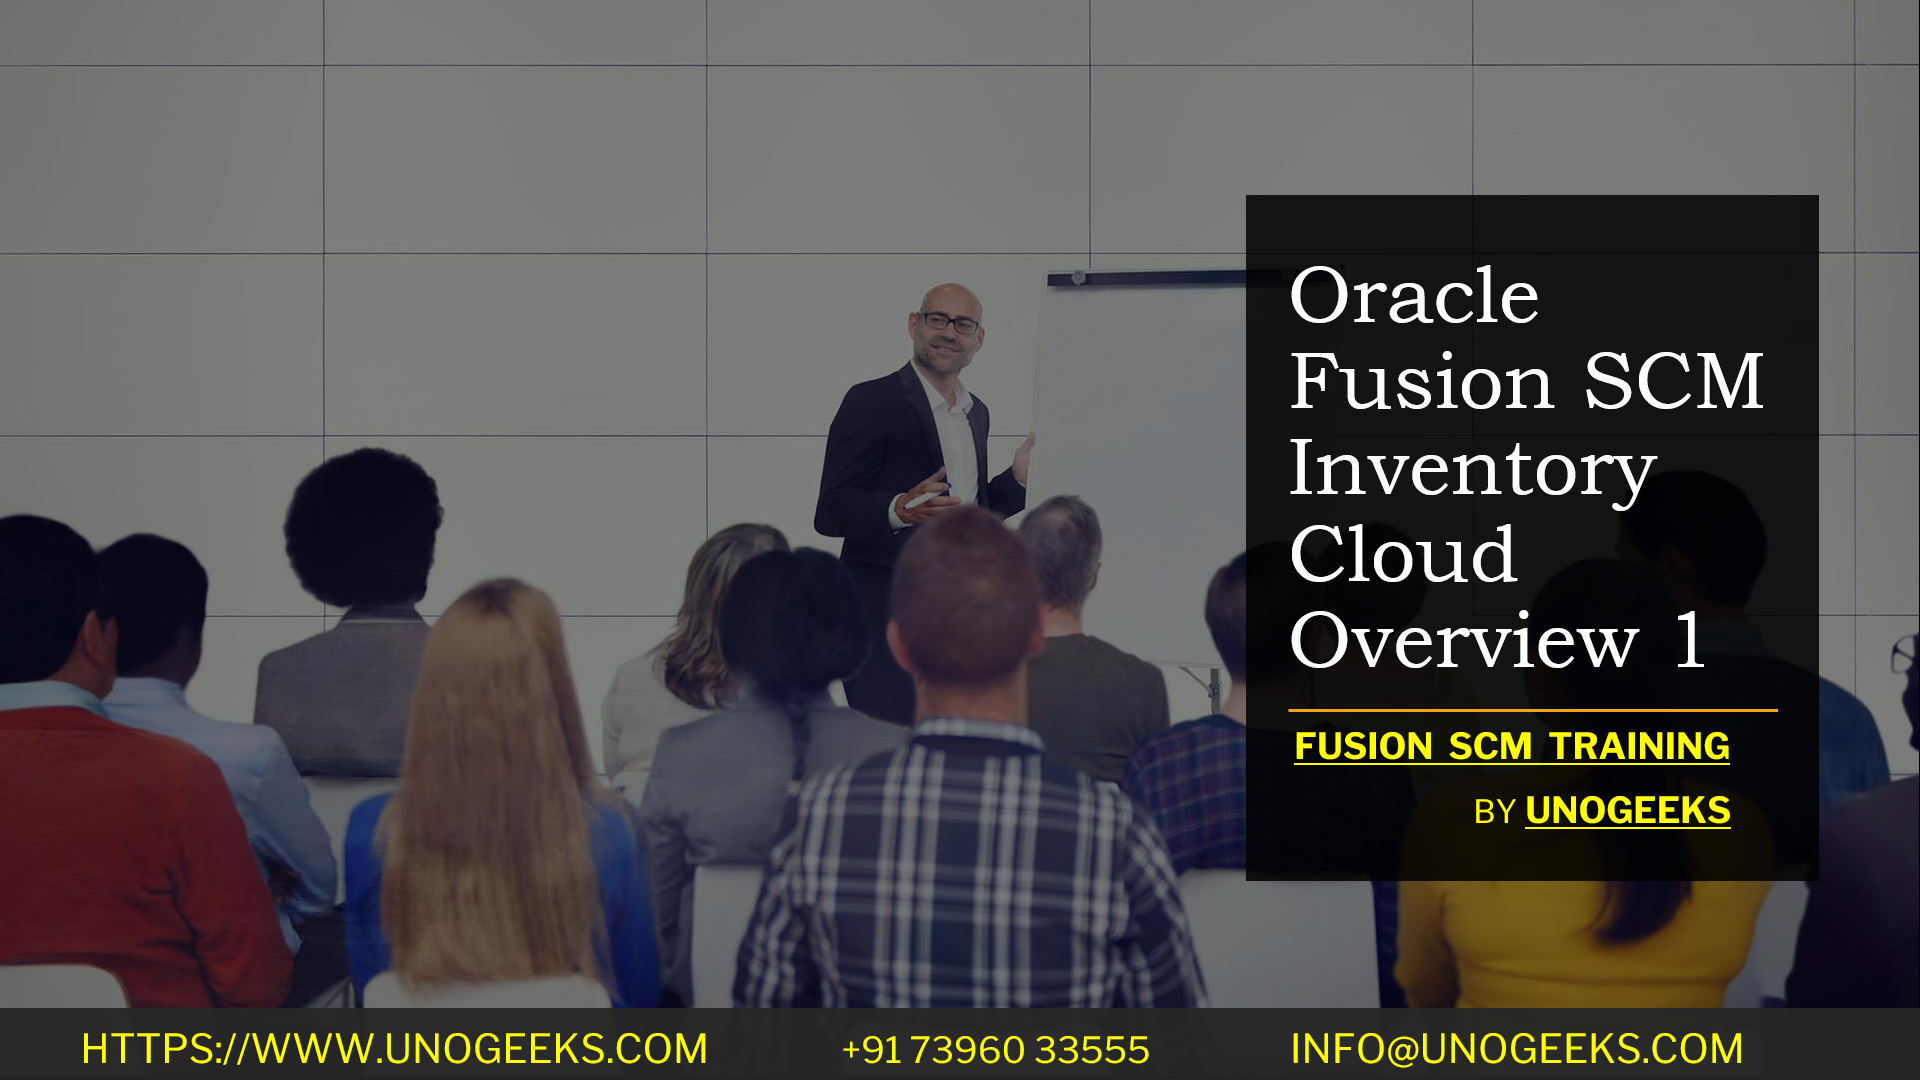 Oracle Fusion SCM Inventory Cloud Overview 1